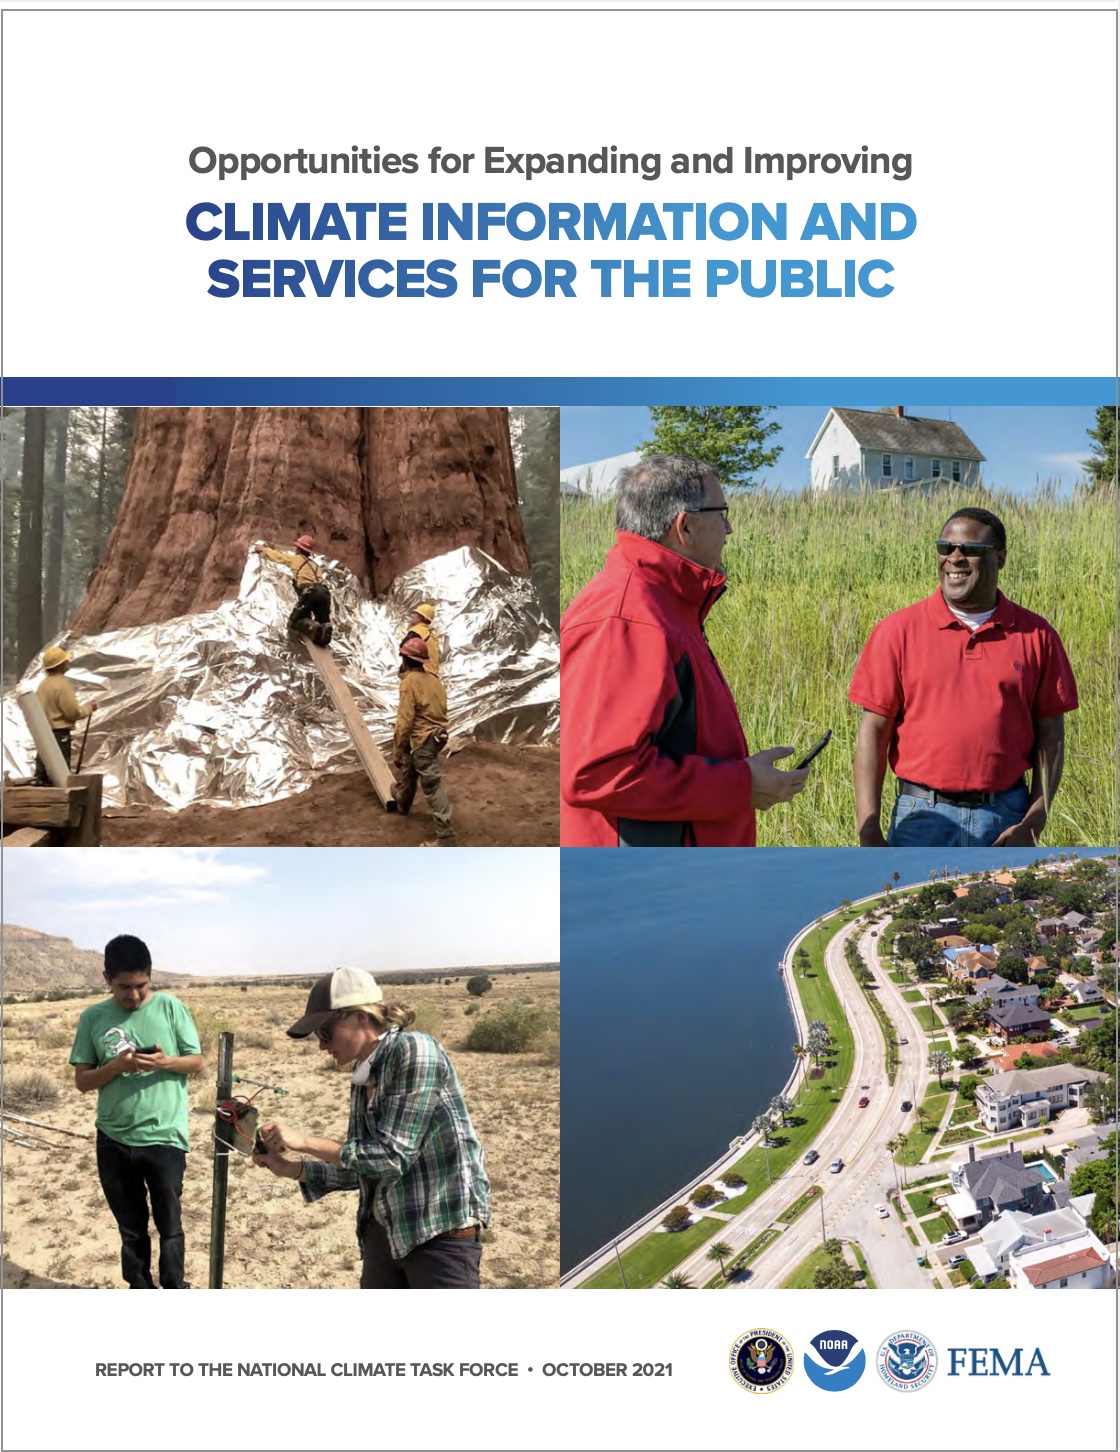 Opportunities for Expanding and Improving Climate Information and Services for the Public